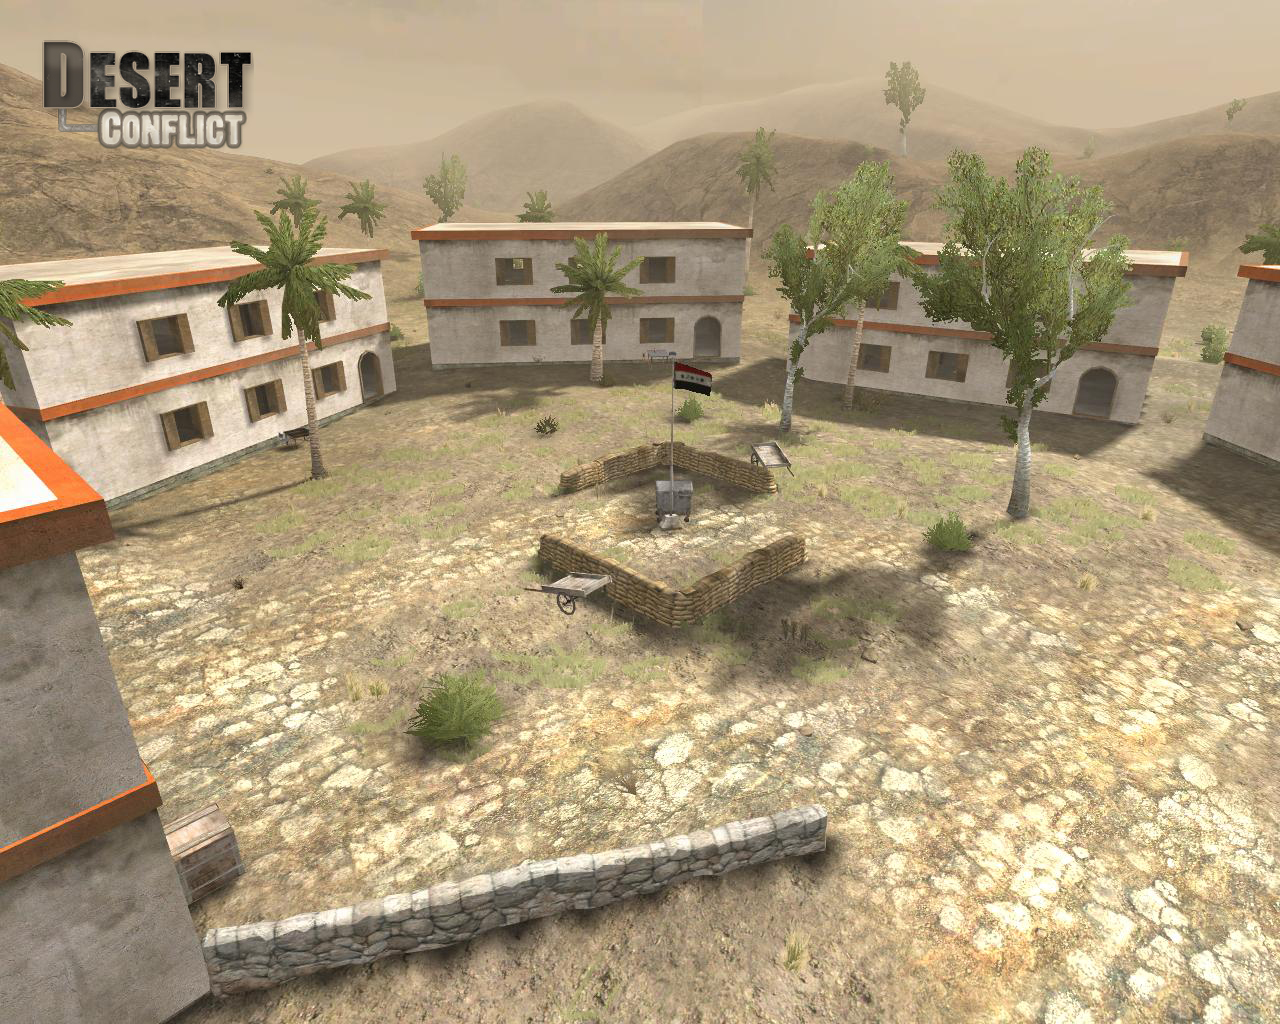 The Lost Village download the new for android